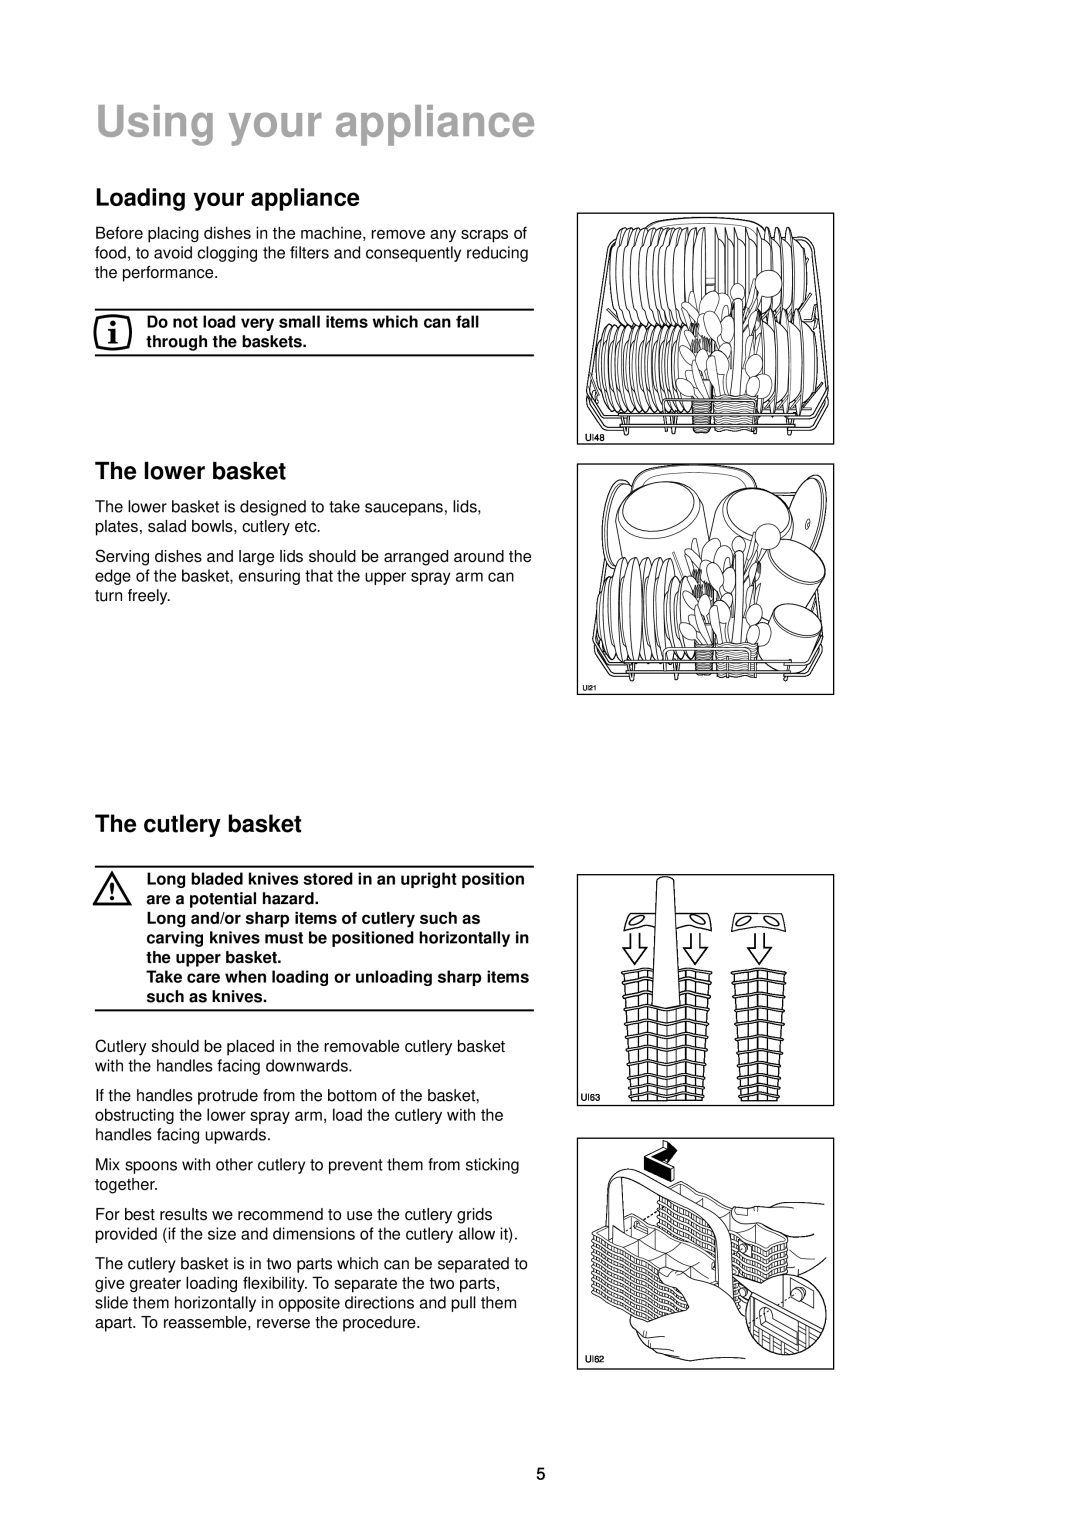 Zanussi ZT 695 manual Using your appliance, Loading your appliance, The lower basket, The cutlery basket 